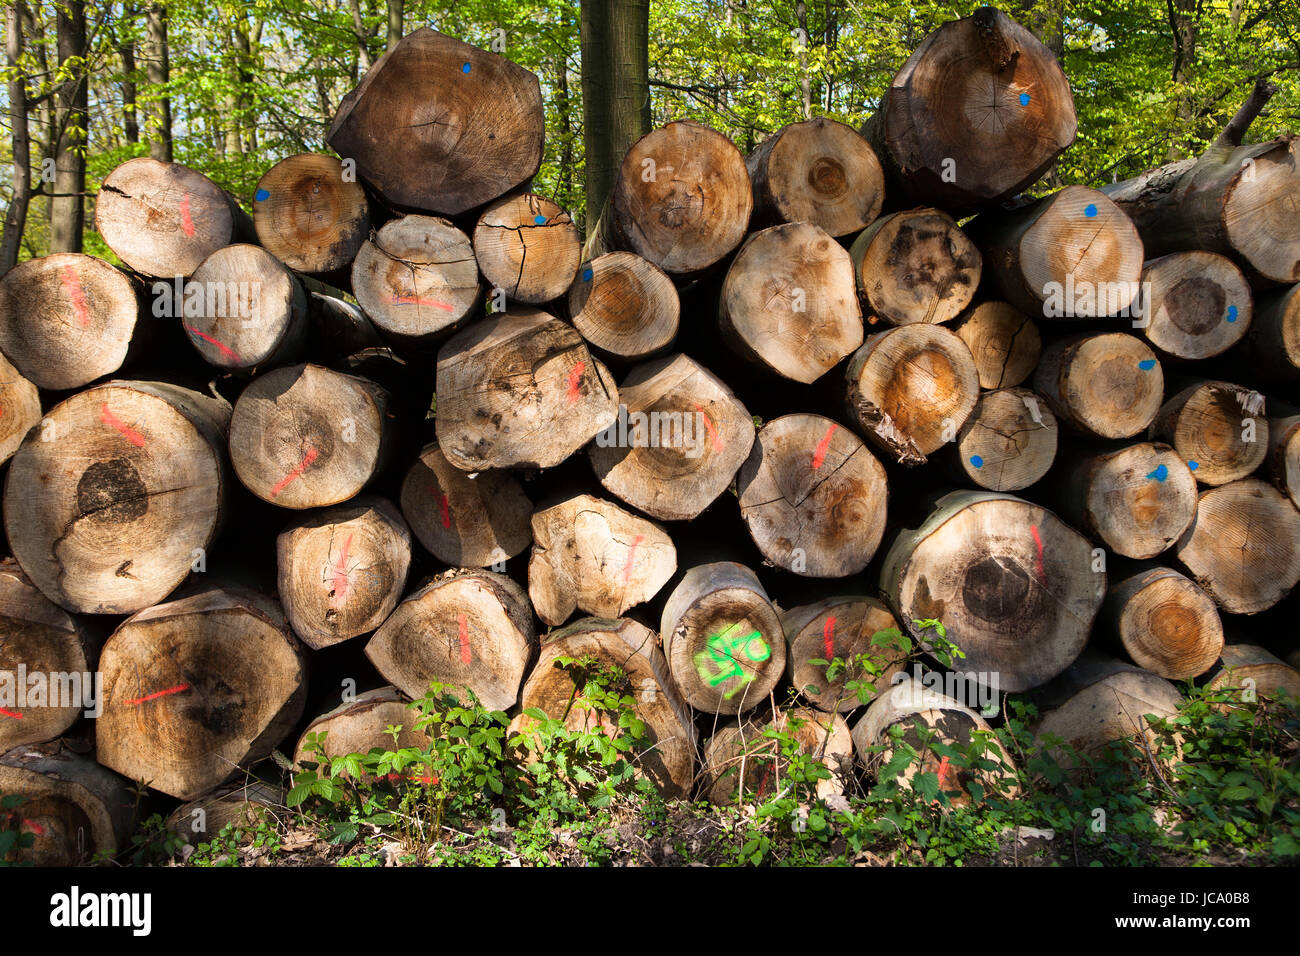 Germany, Ruhr area, felled and stacked beech trees near Wetter. Stock Photo